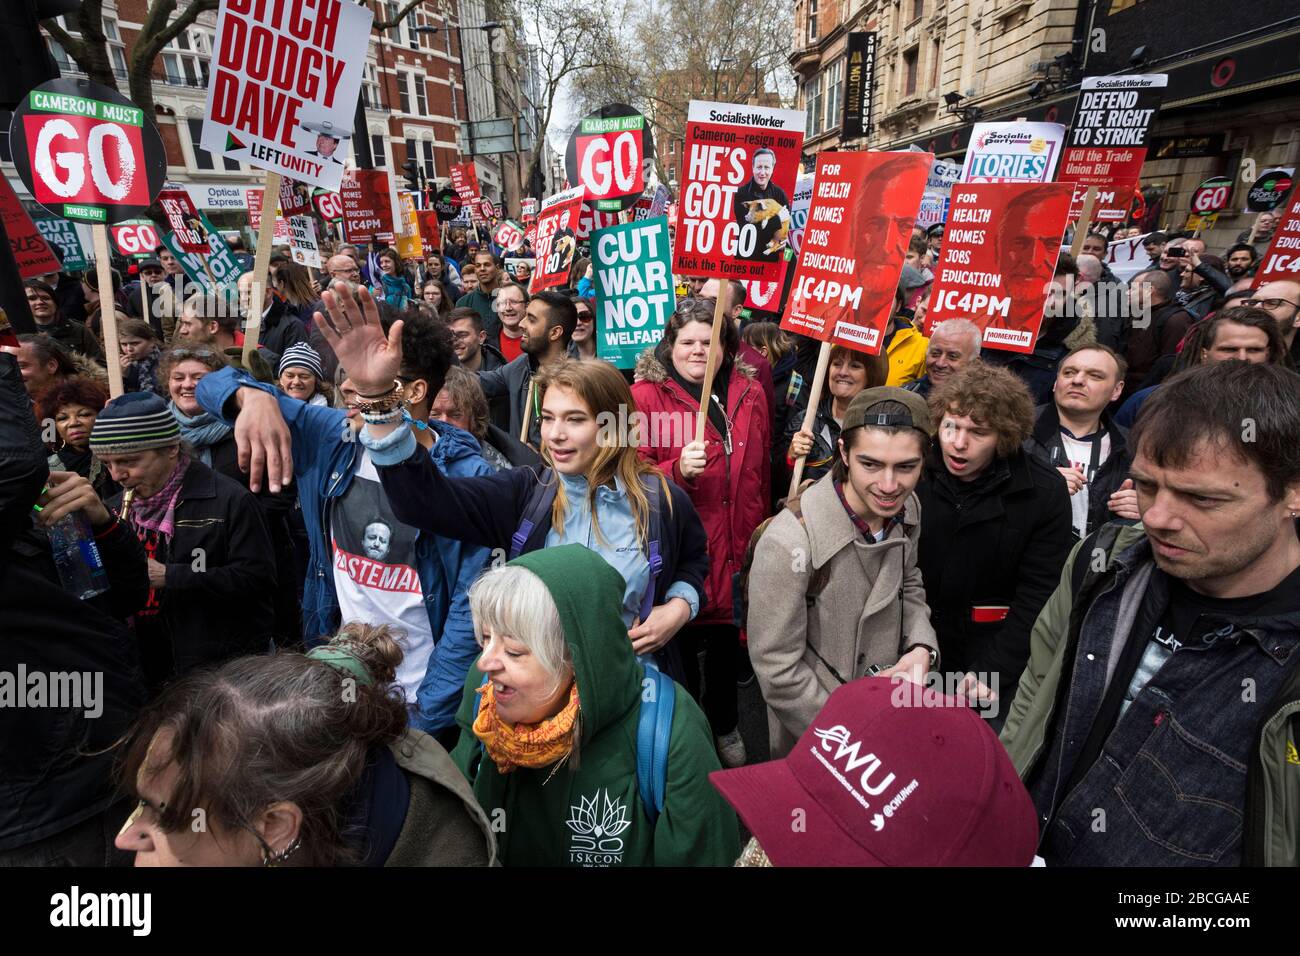 Crowd of protesters at an Anti-Austerity demonstration in London Stock Photo